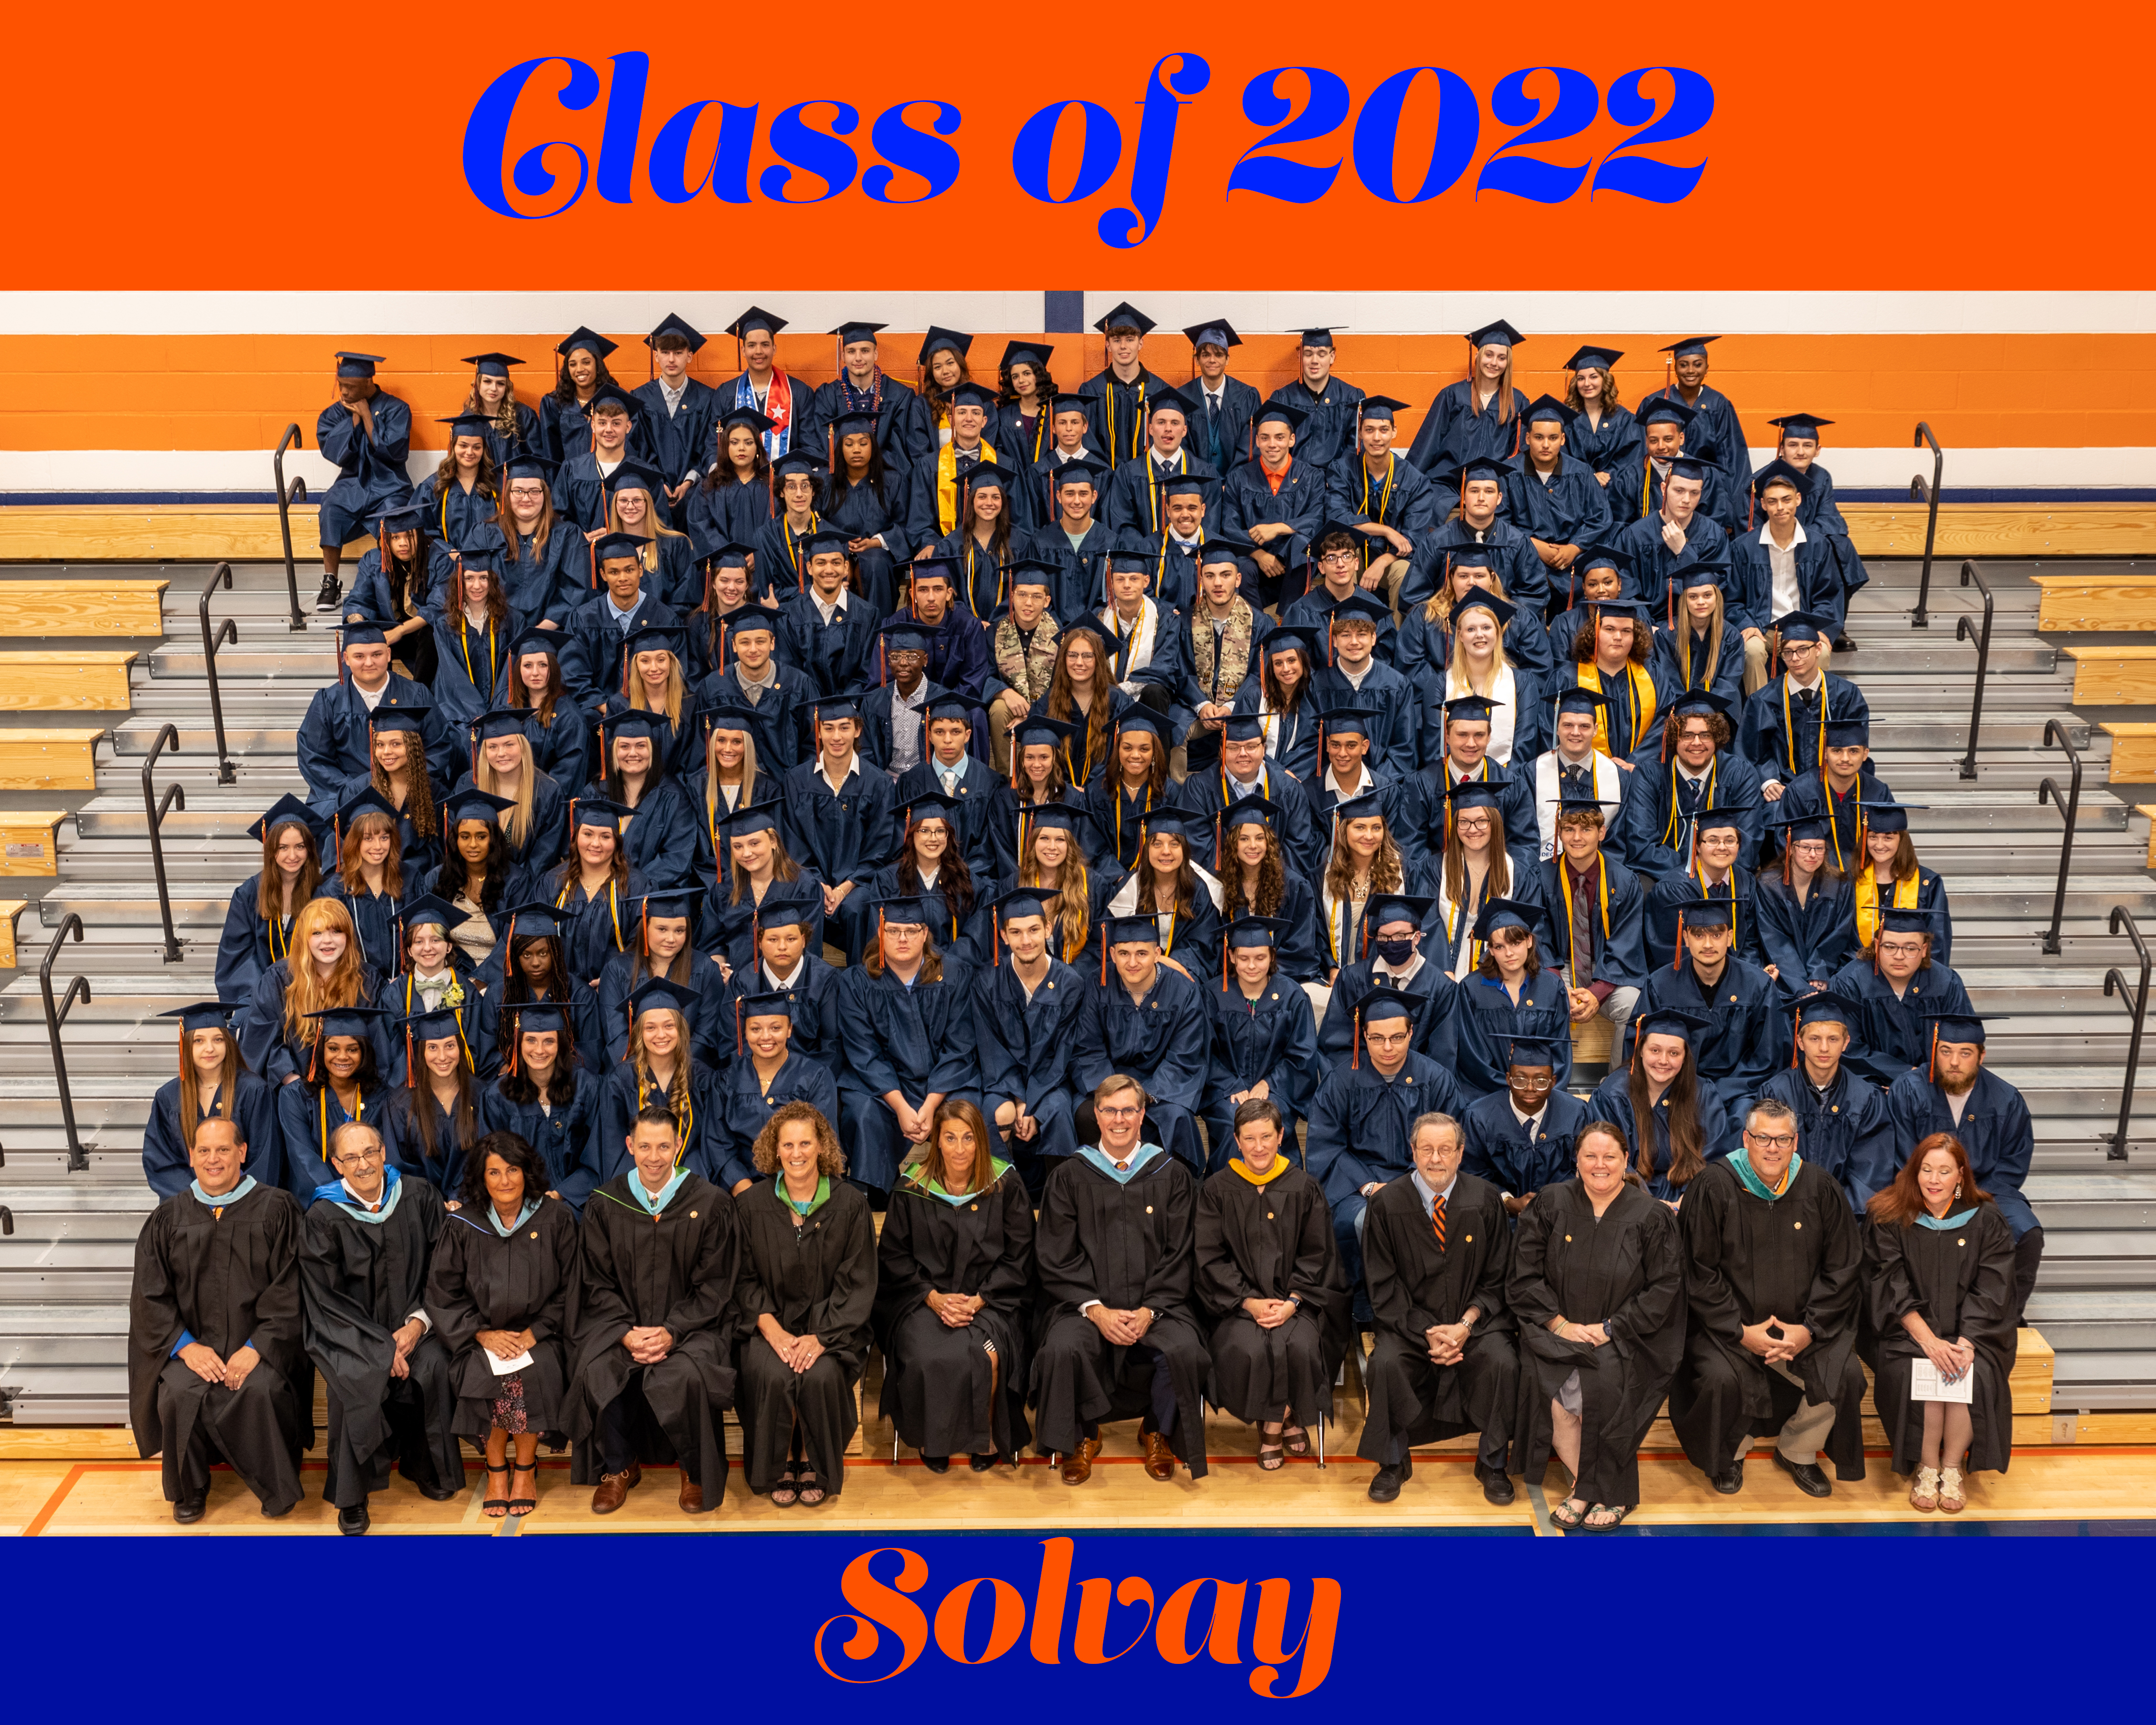 solvay class of 2022 text with image of graduating class